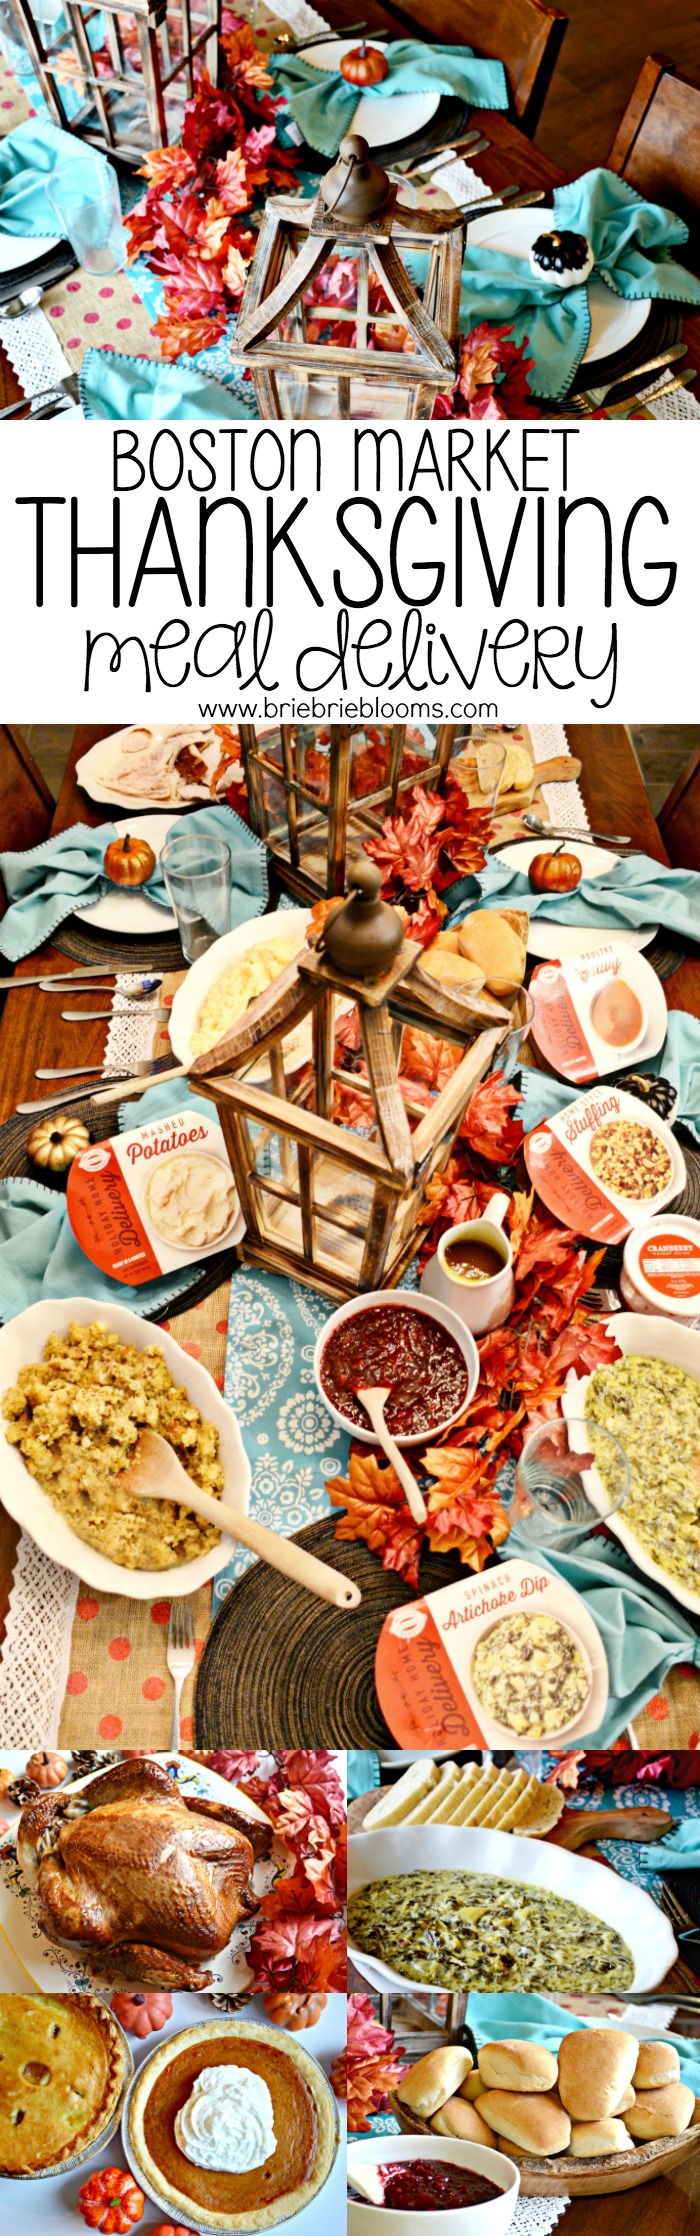 Boston Market Complete Thanksgiving Meals have many different options that are appropriate for all holiday plans including the Thanksgiving Meal Delivery.